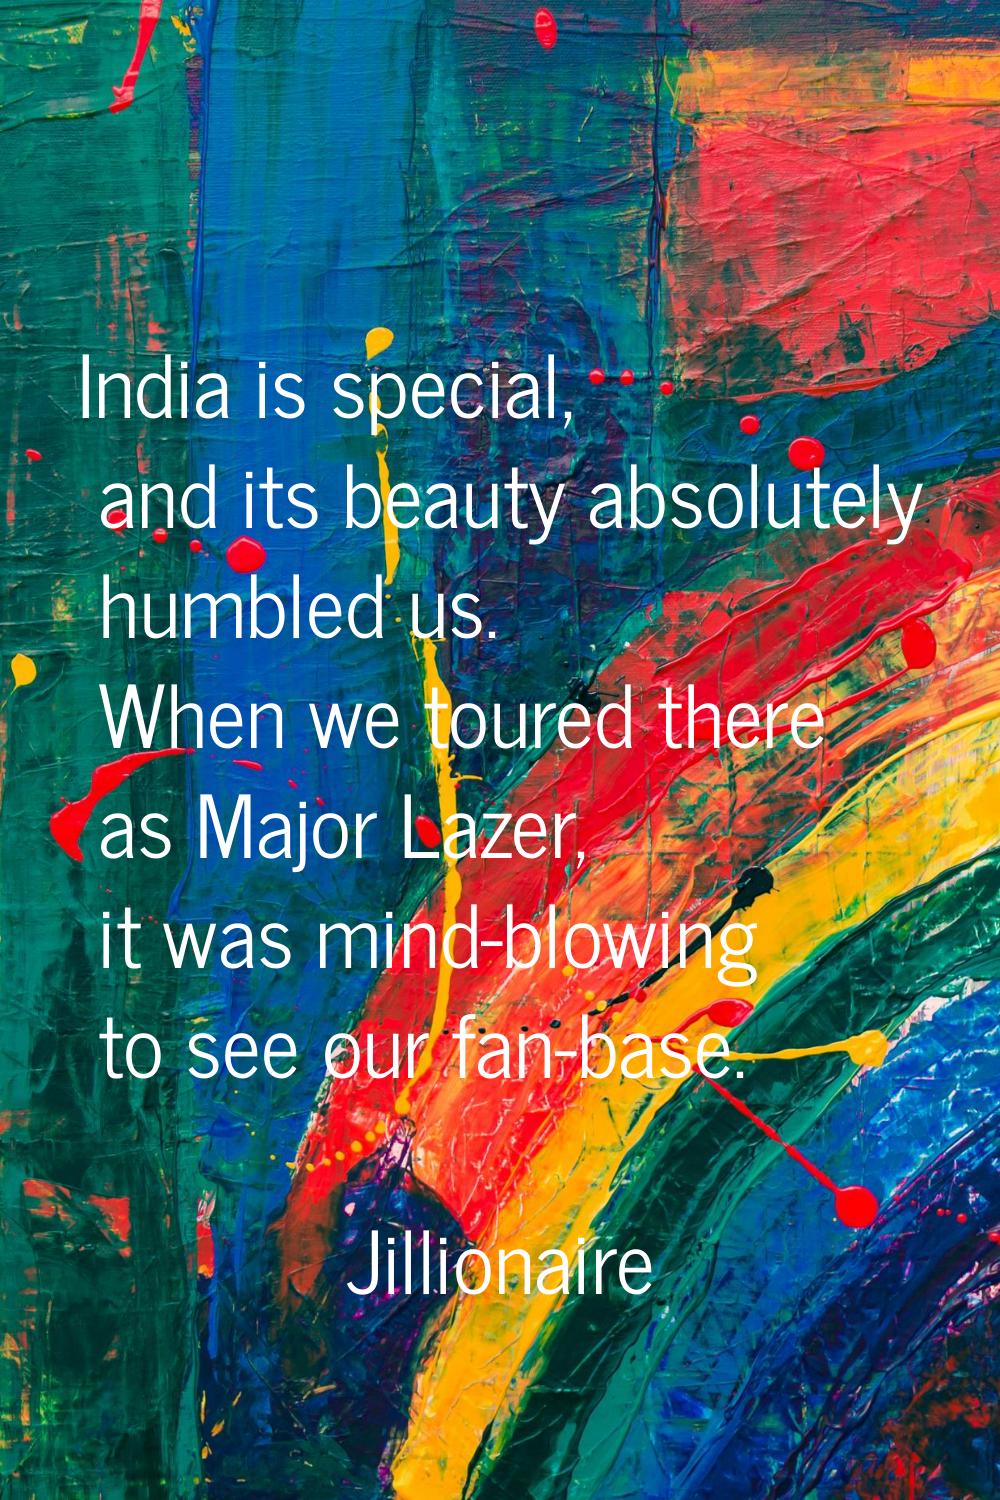 India is special, and its beauty absolutely humbled us. When we toured there as Major Lazer, it was